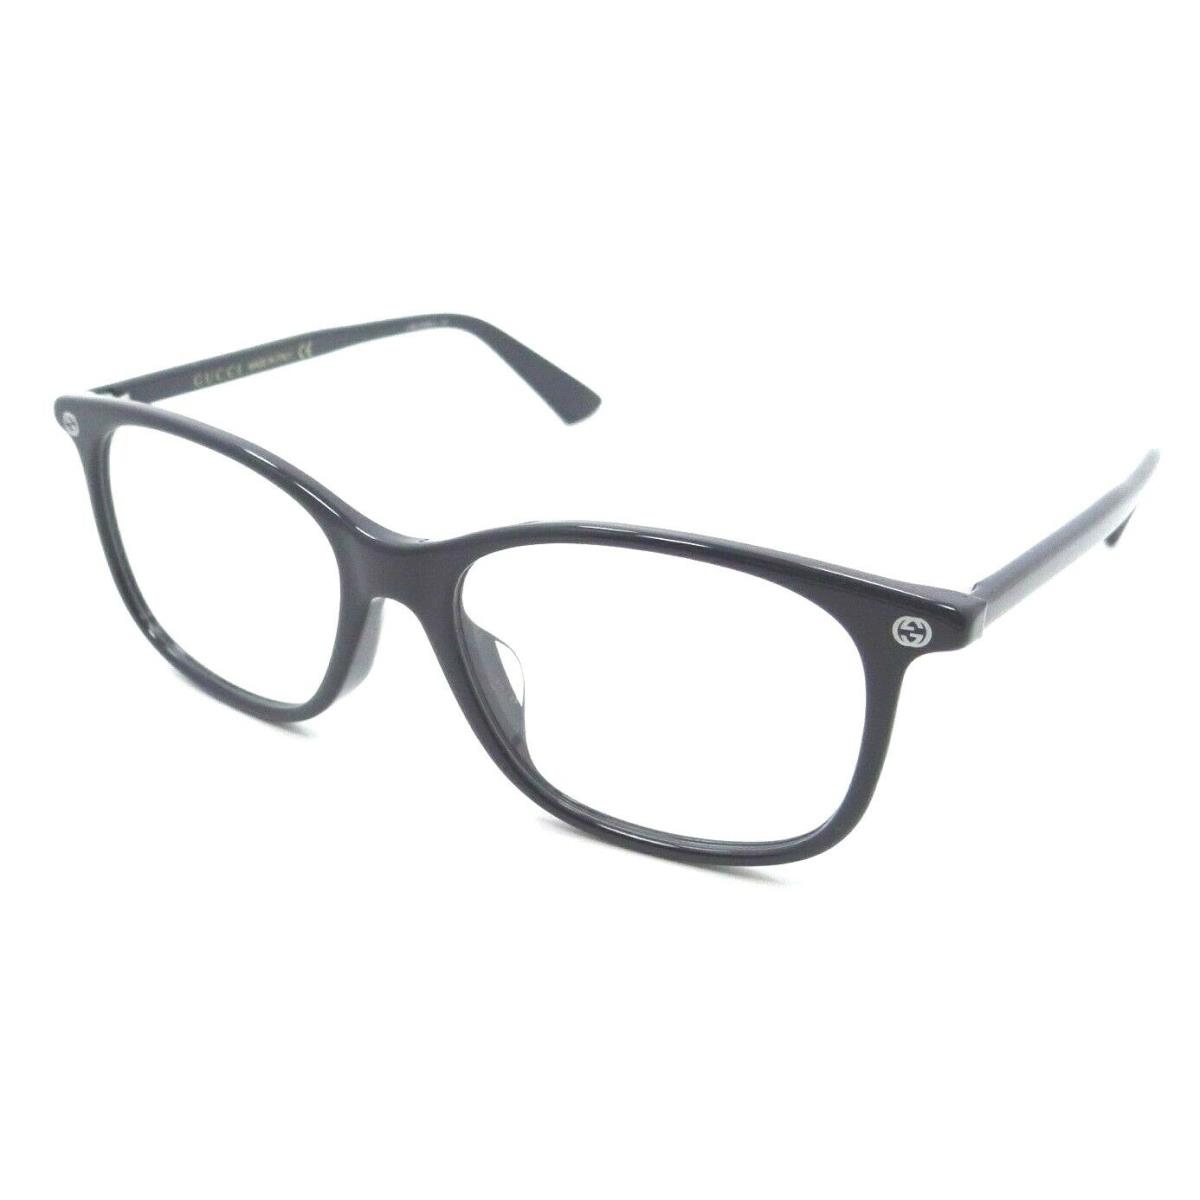 Gucci Eyeglasses Frames GG0157OA 005 52-17-145 Blue Made in Italy